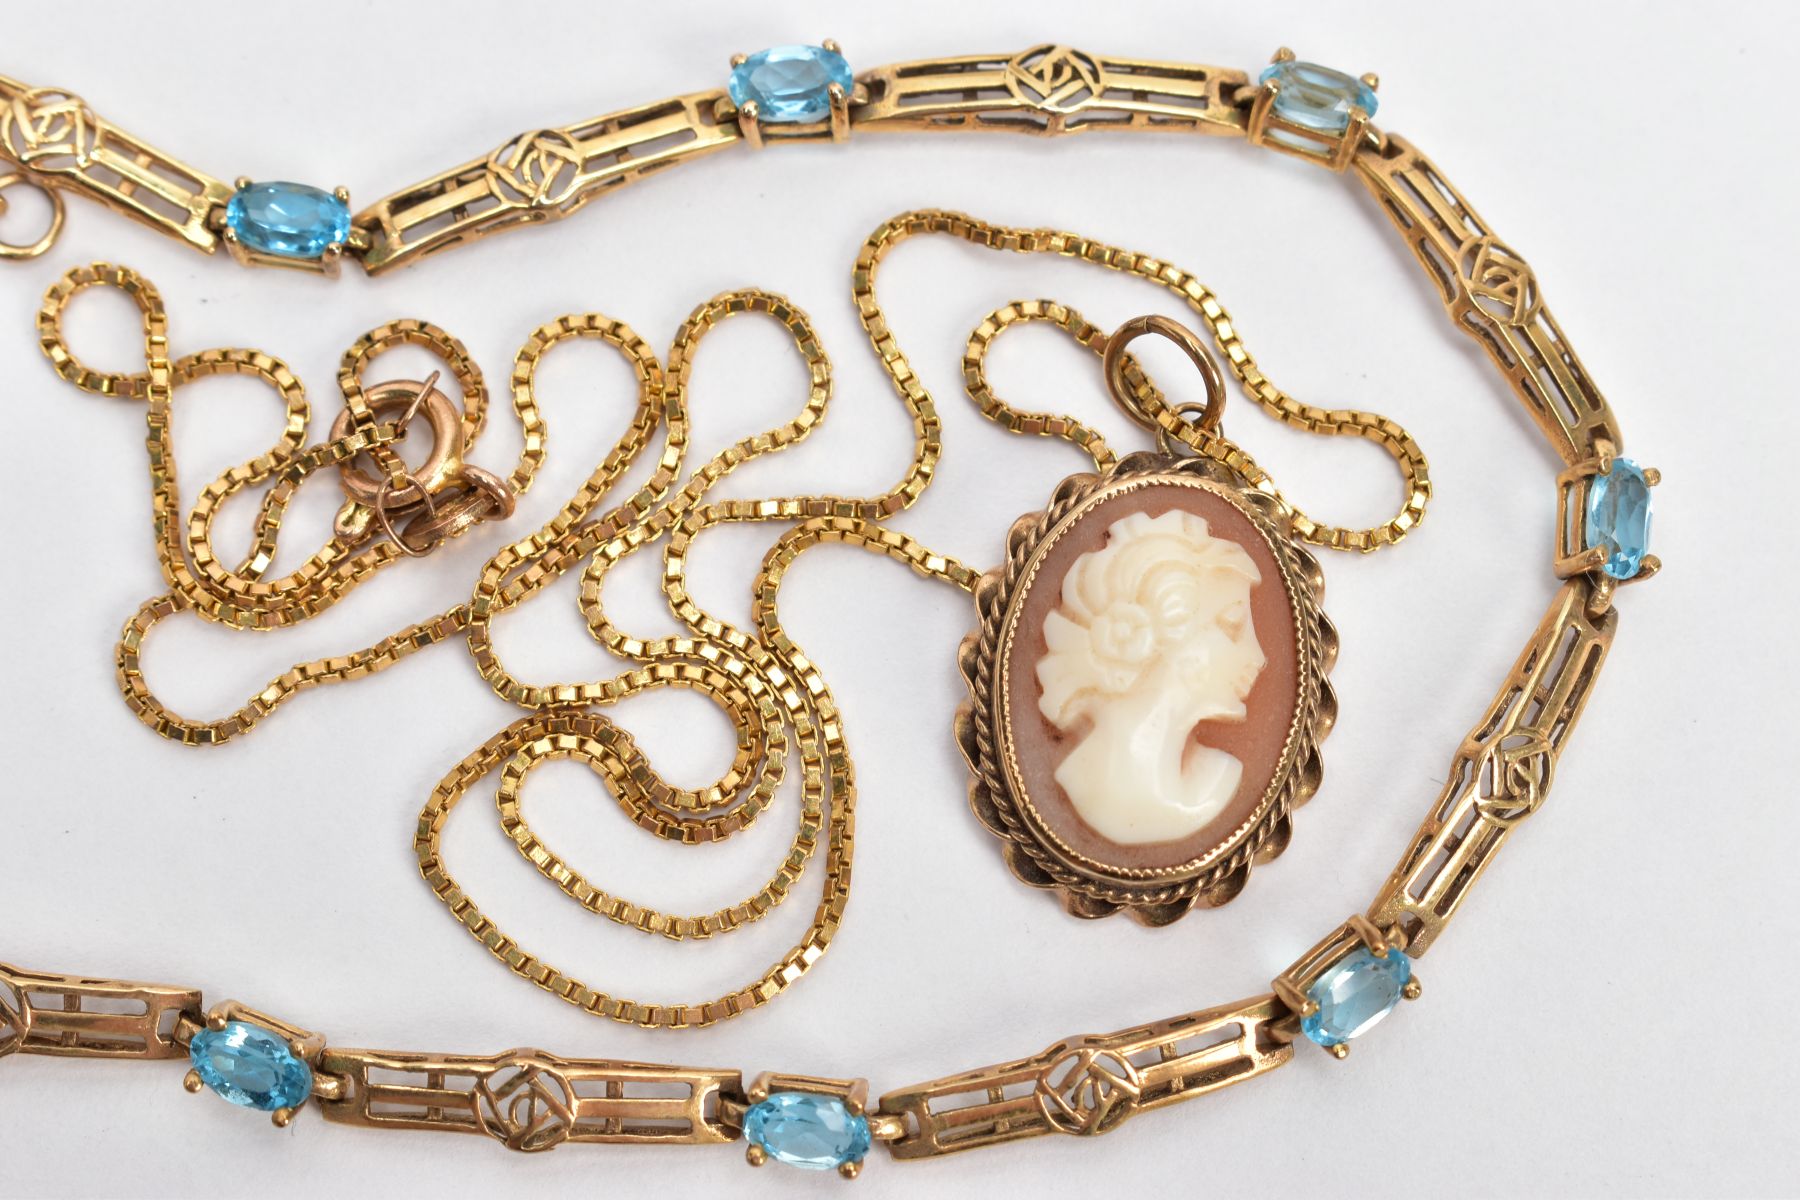 A 9CT GOLD TOPAZ BRACELET AND CAMEO NECKLACE, nine oval cut blue topaz stones interspaced between - Image 3 of 3